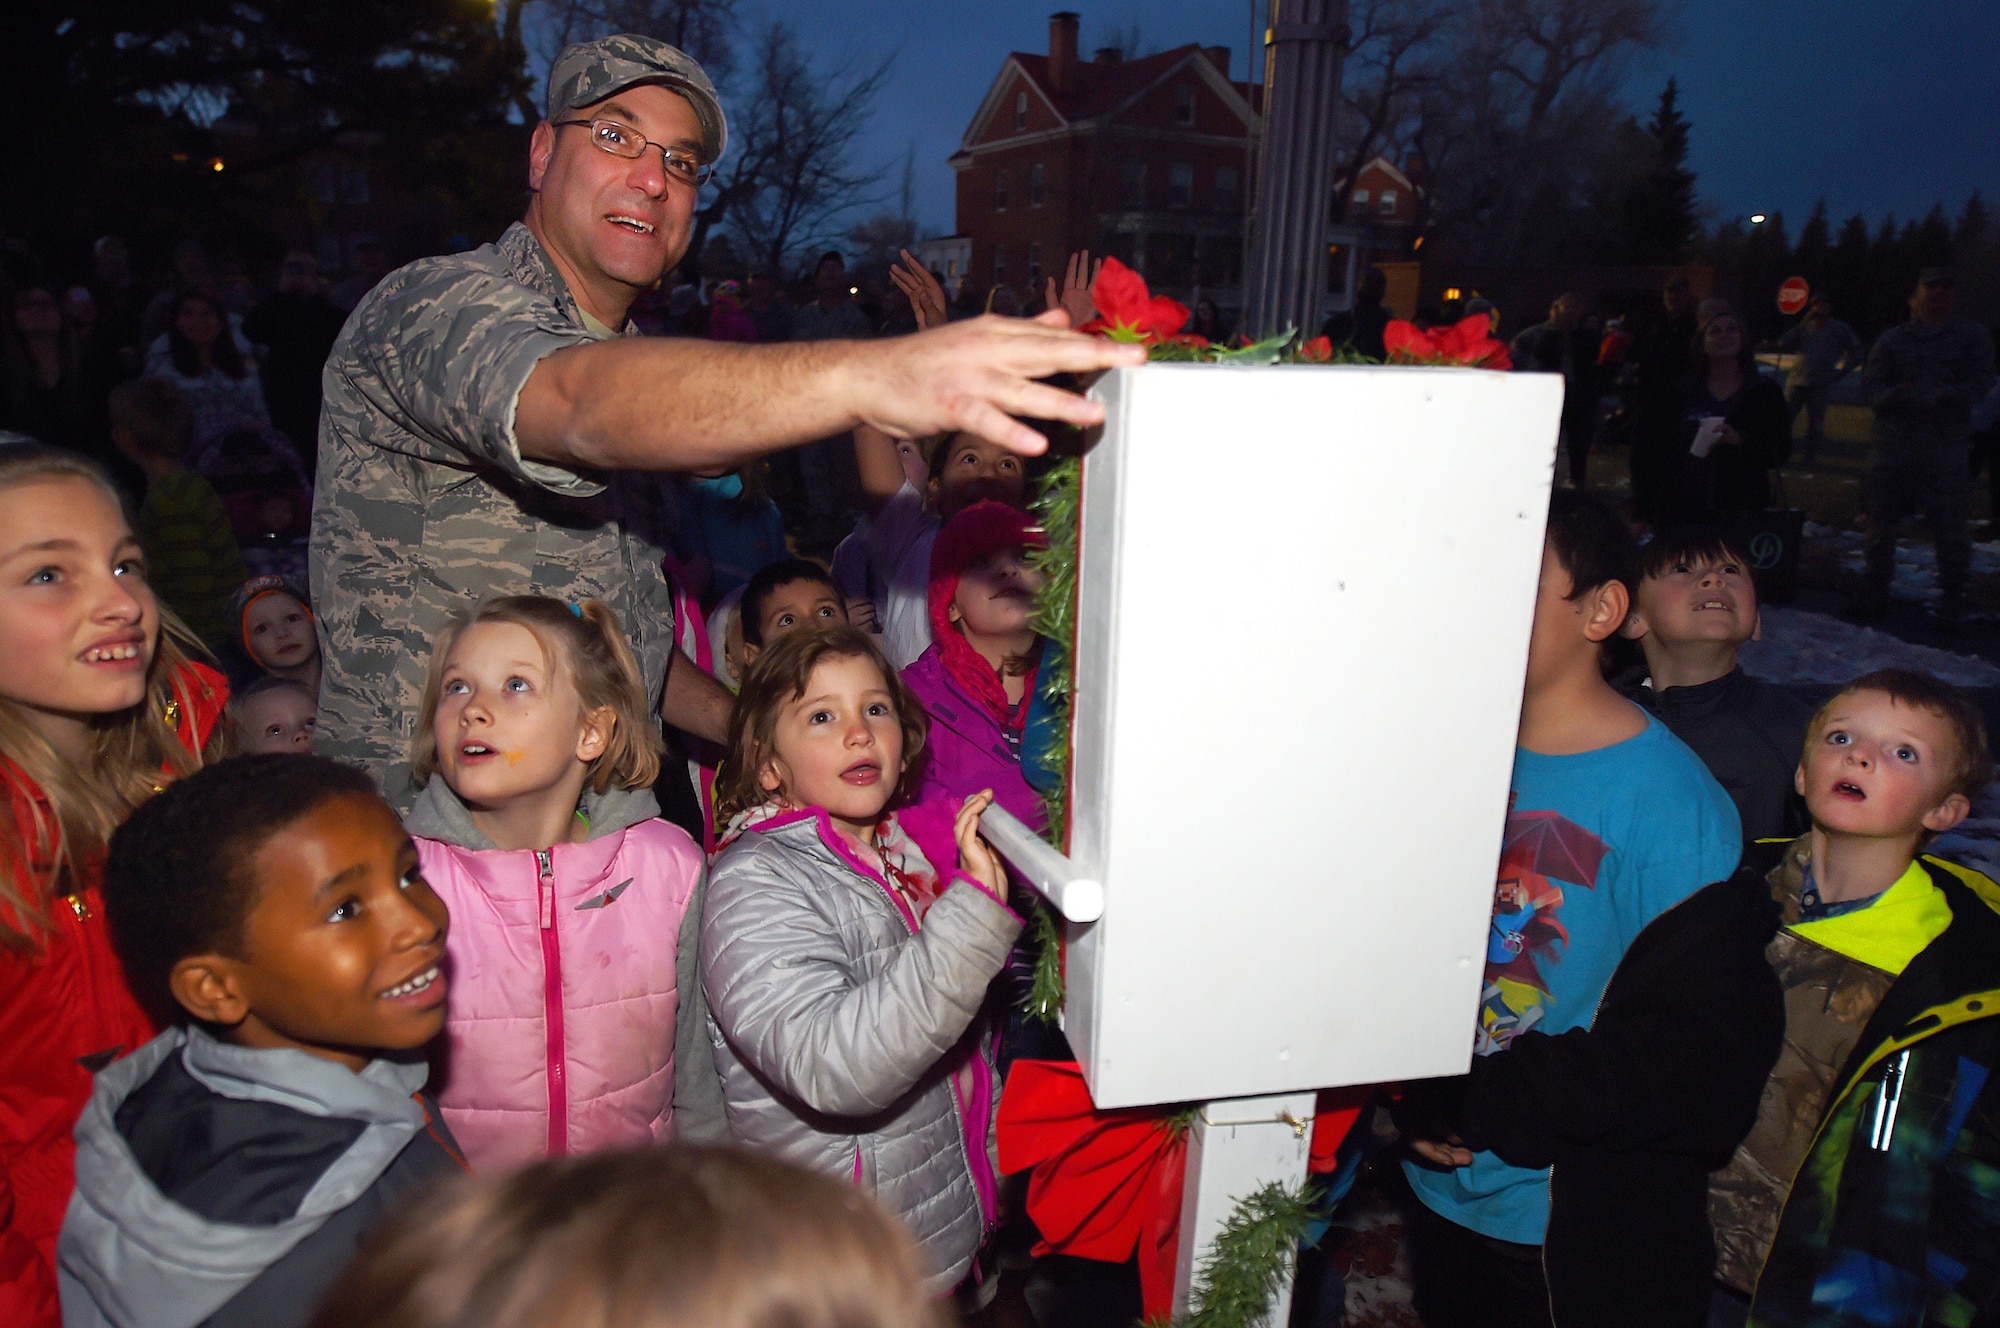 Children of the F.E. Warren Air Force Base, Wyo., community help Col. Stephen Kravitsky, 90th Missile Wing commander, flip the switch lighting the base's holiday tree Dec. 4, 2015. After the lighting, the festivities moved into the Fall Hall Community Center where children were able to visit with Santa and Mrs. Claus, decorate cookies and other crafts, and their parents strolled through stalls selling a wide assortment of craft items. (U.S. Air Force photo by R.J. Oriez)